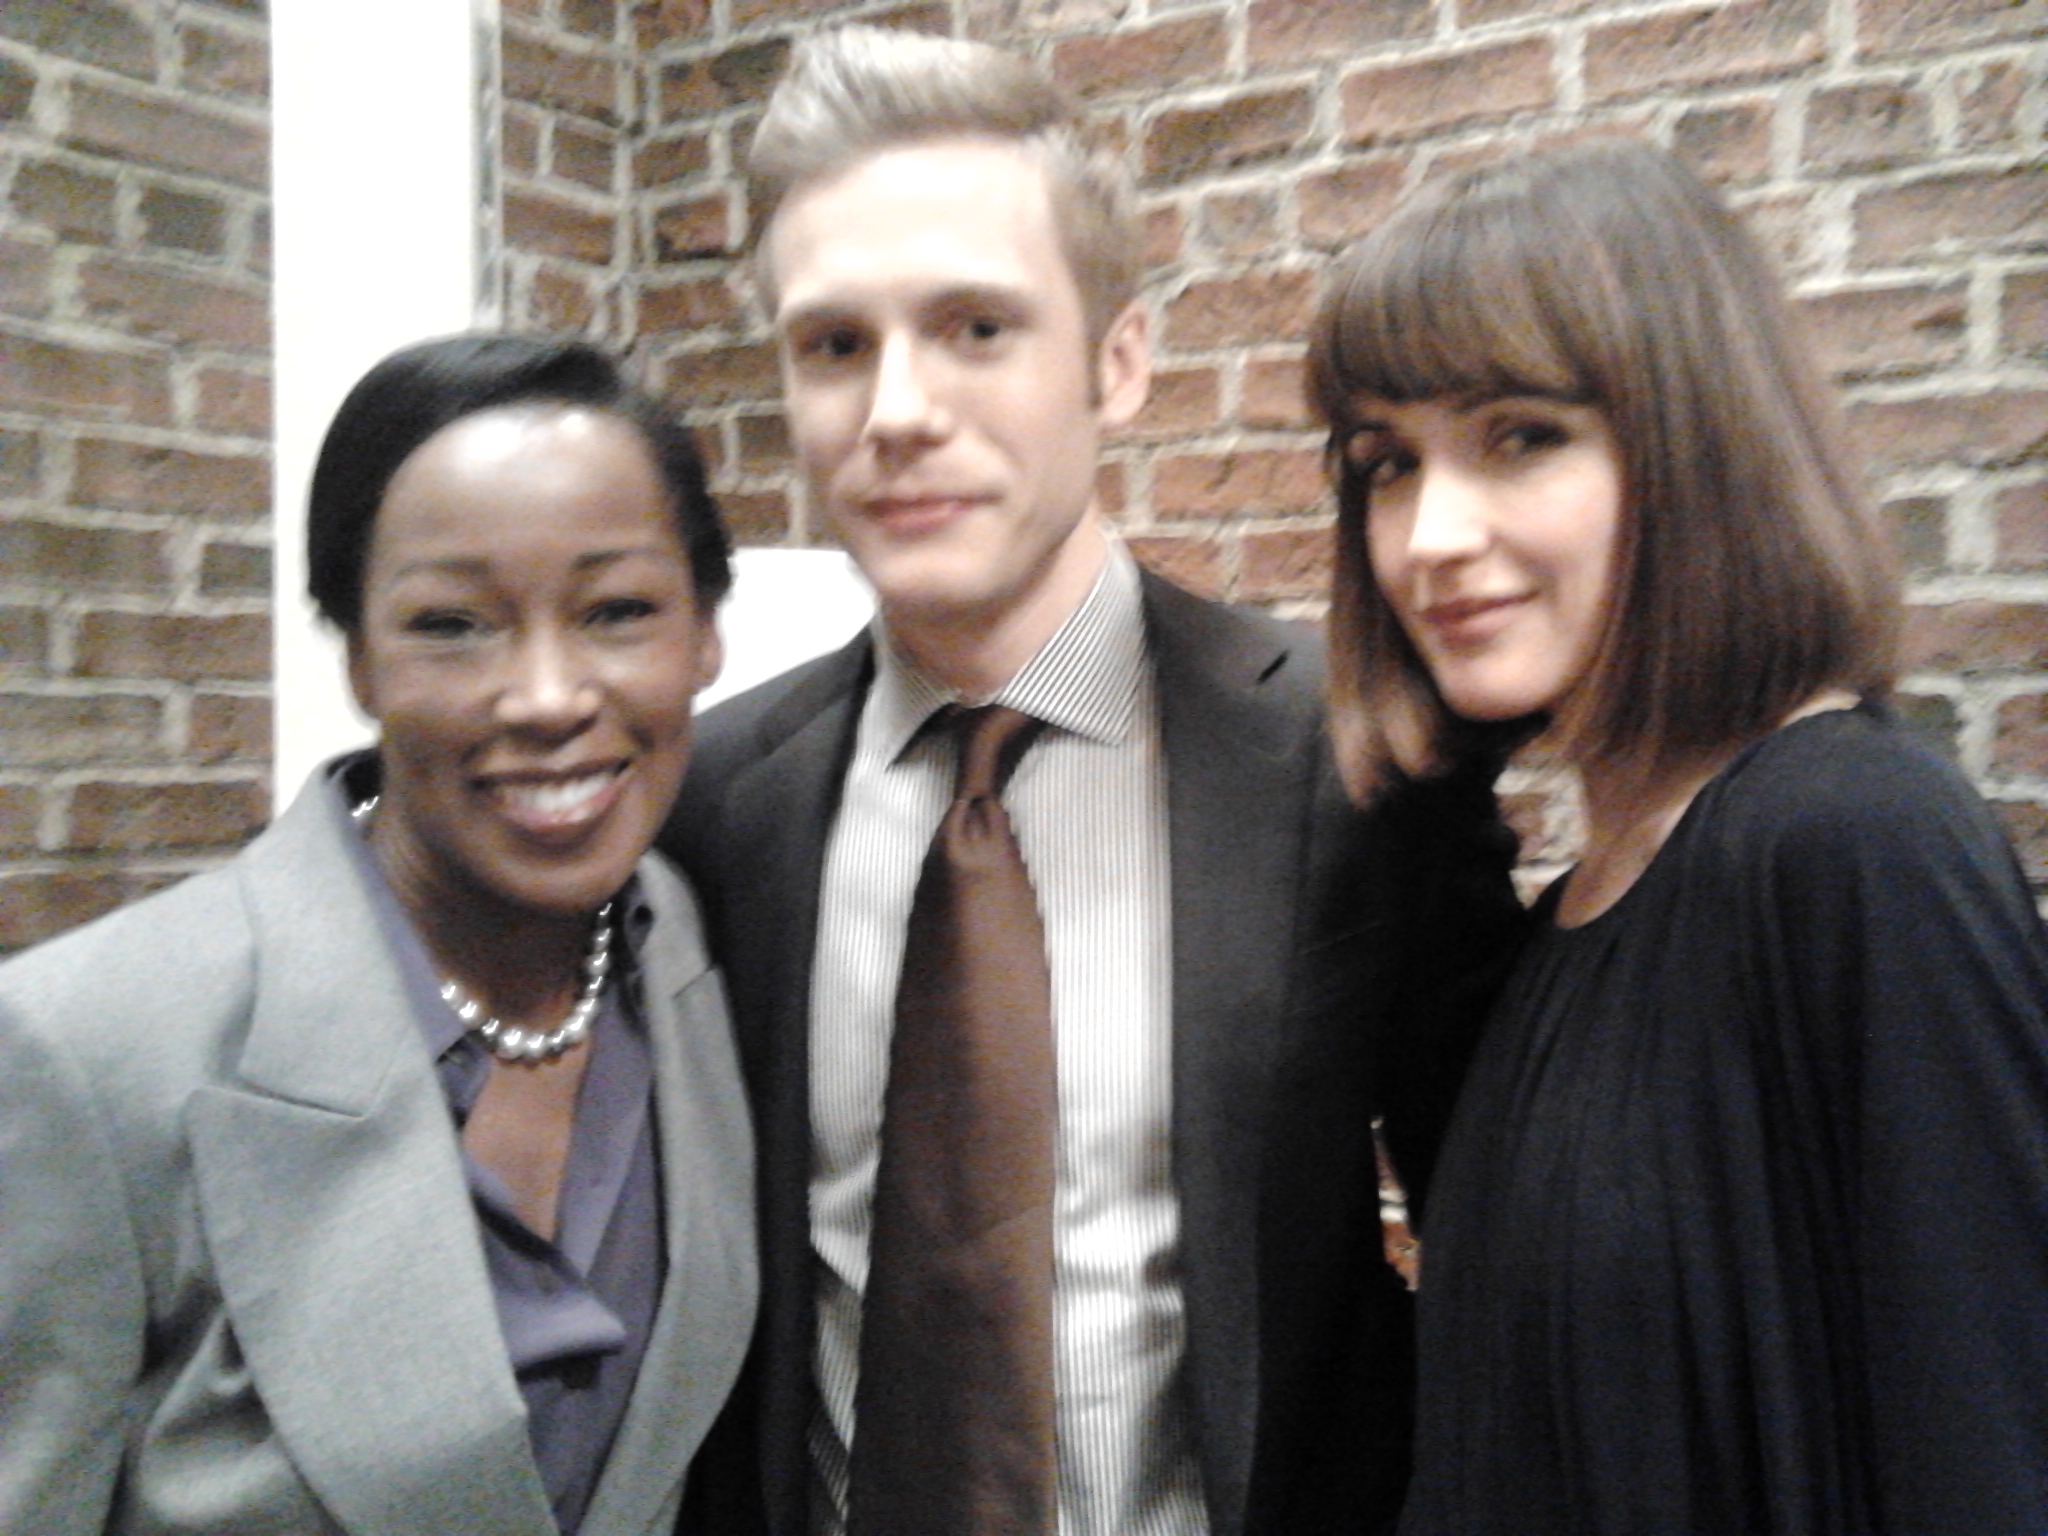 JoAnna, Zach Booth and Rose Byrne On the set of DAMAGES Season 5 - 2012